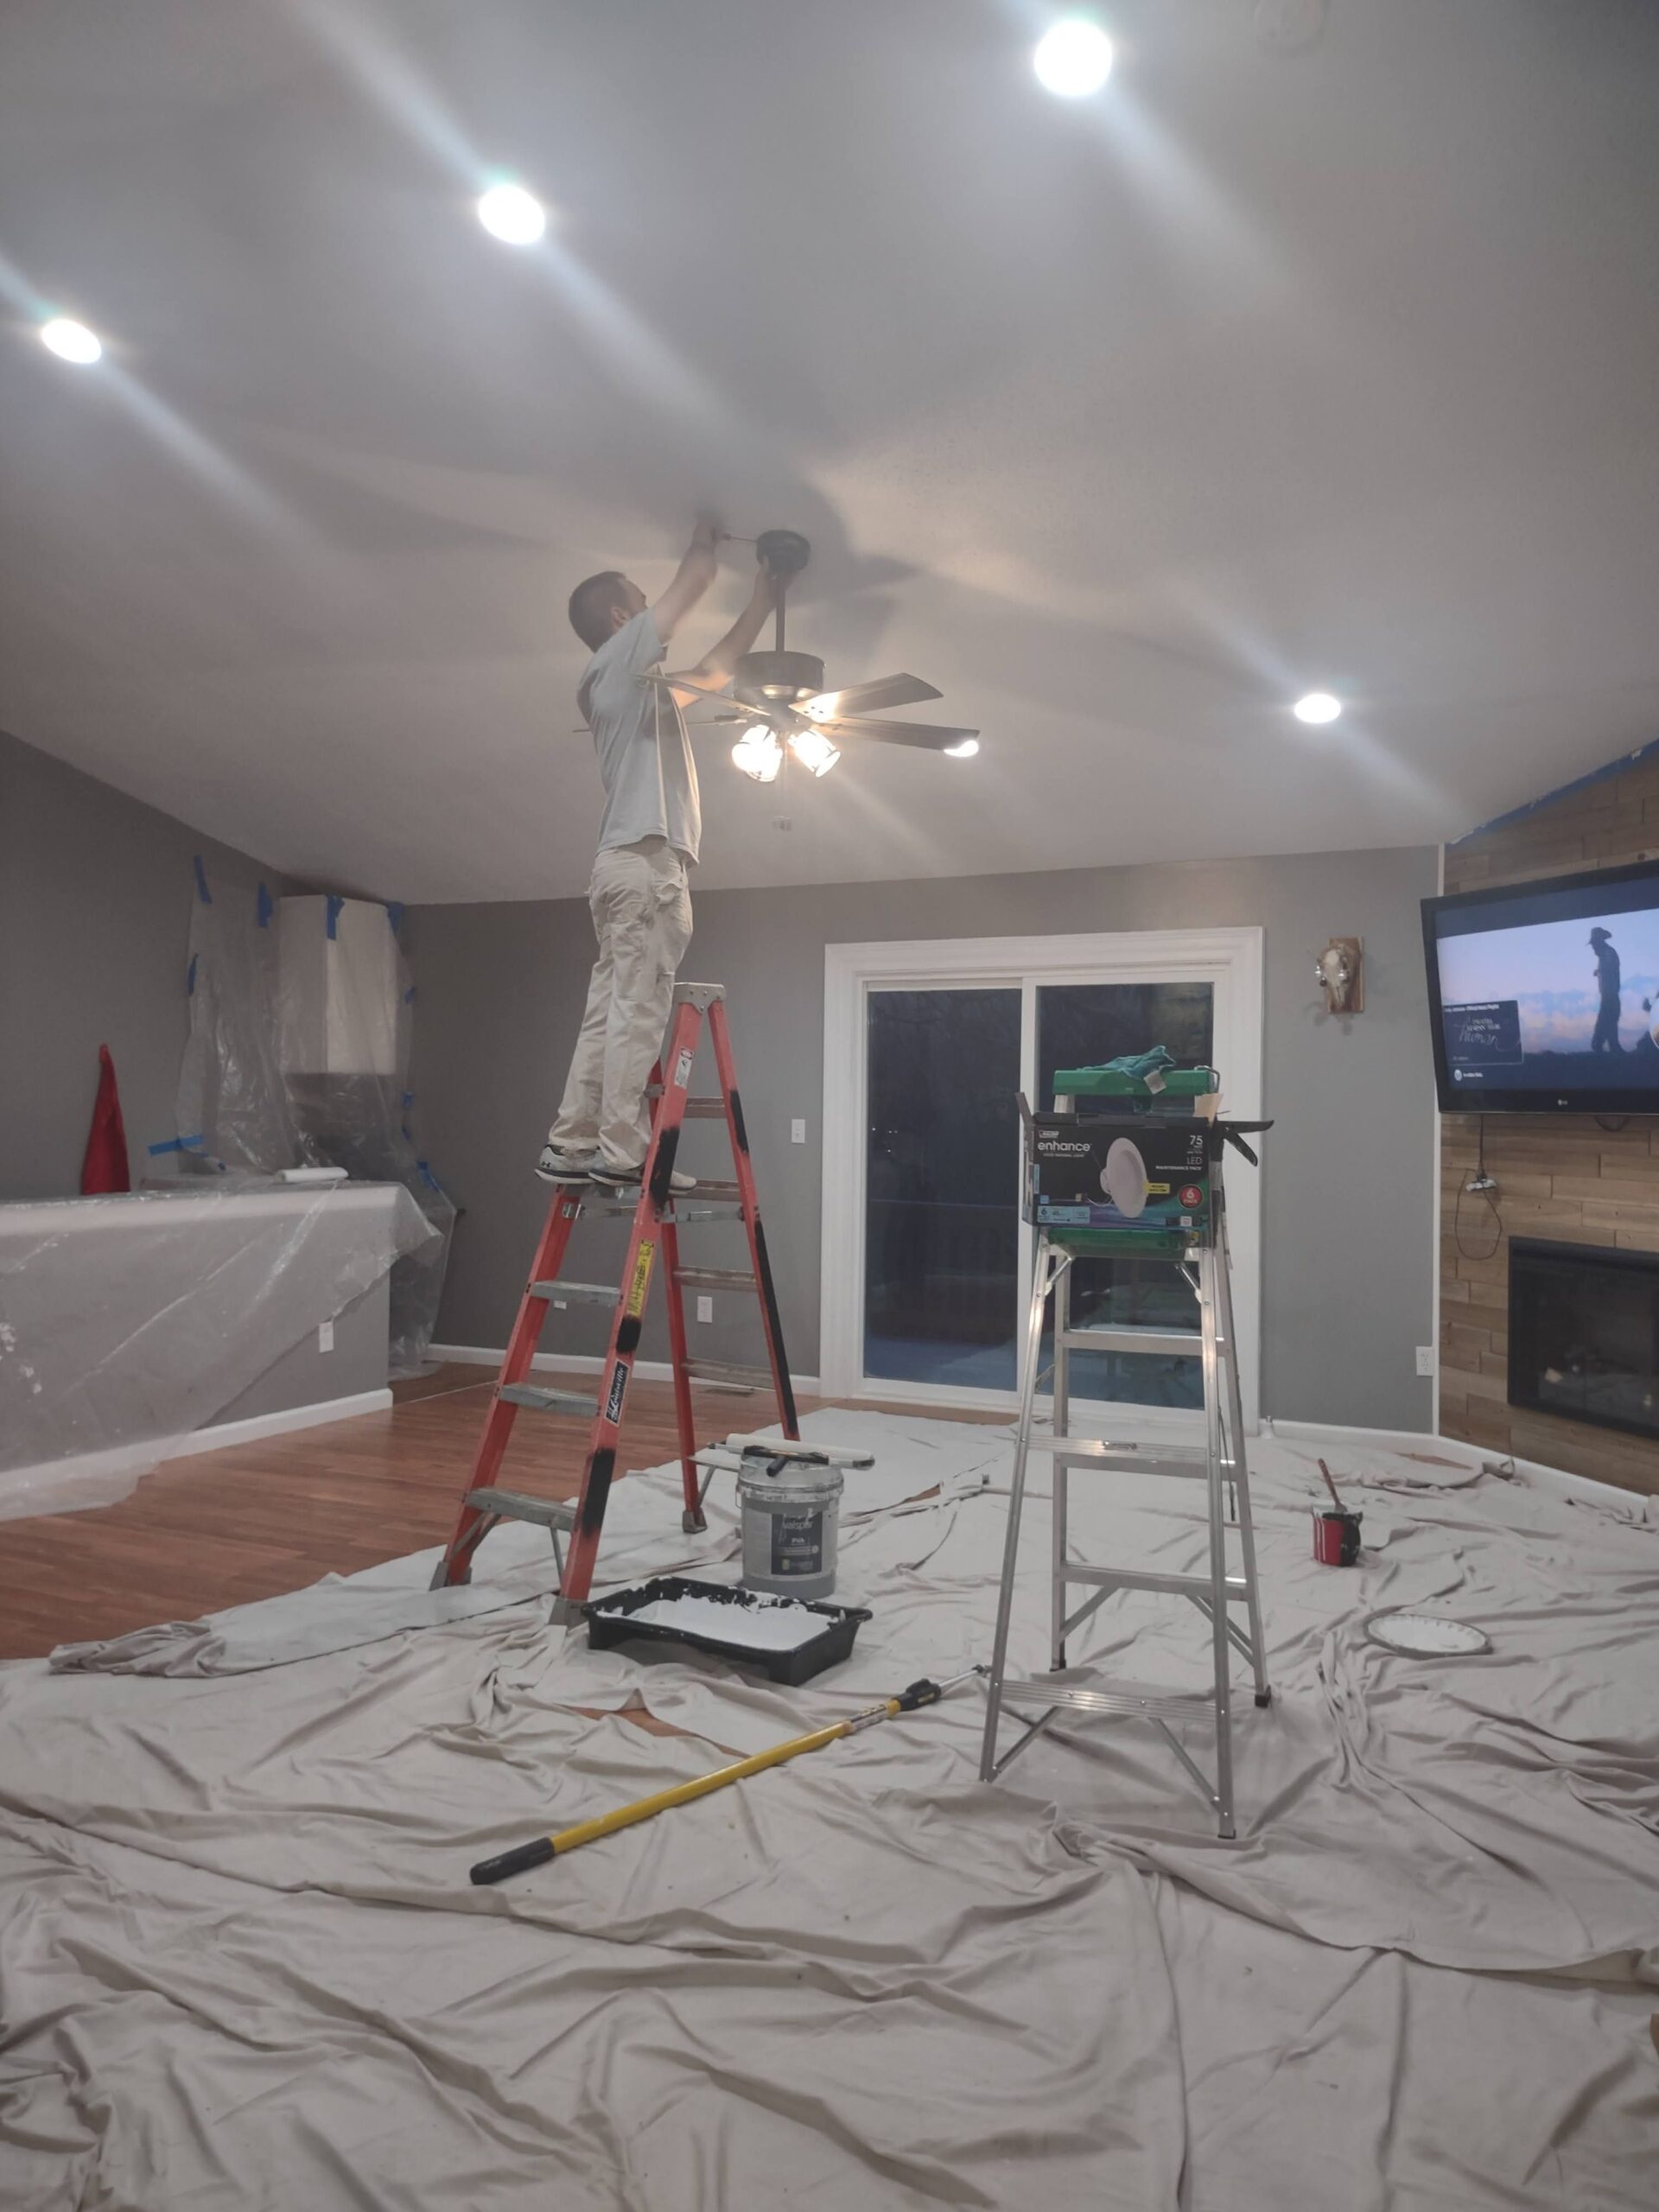 light fixture and ceiling fan replacement